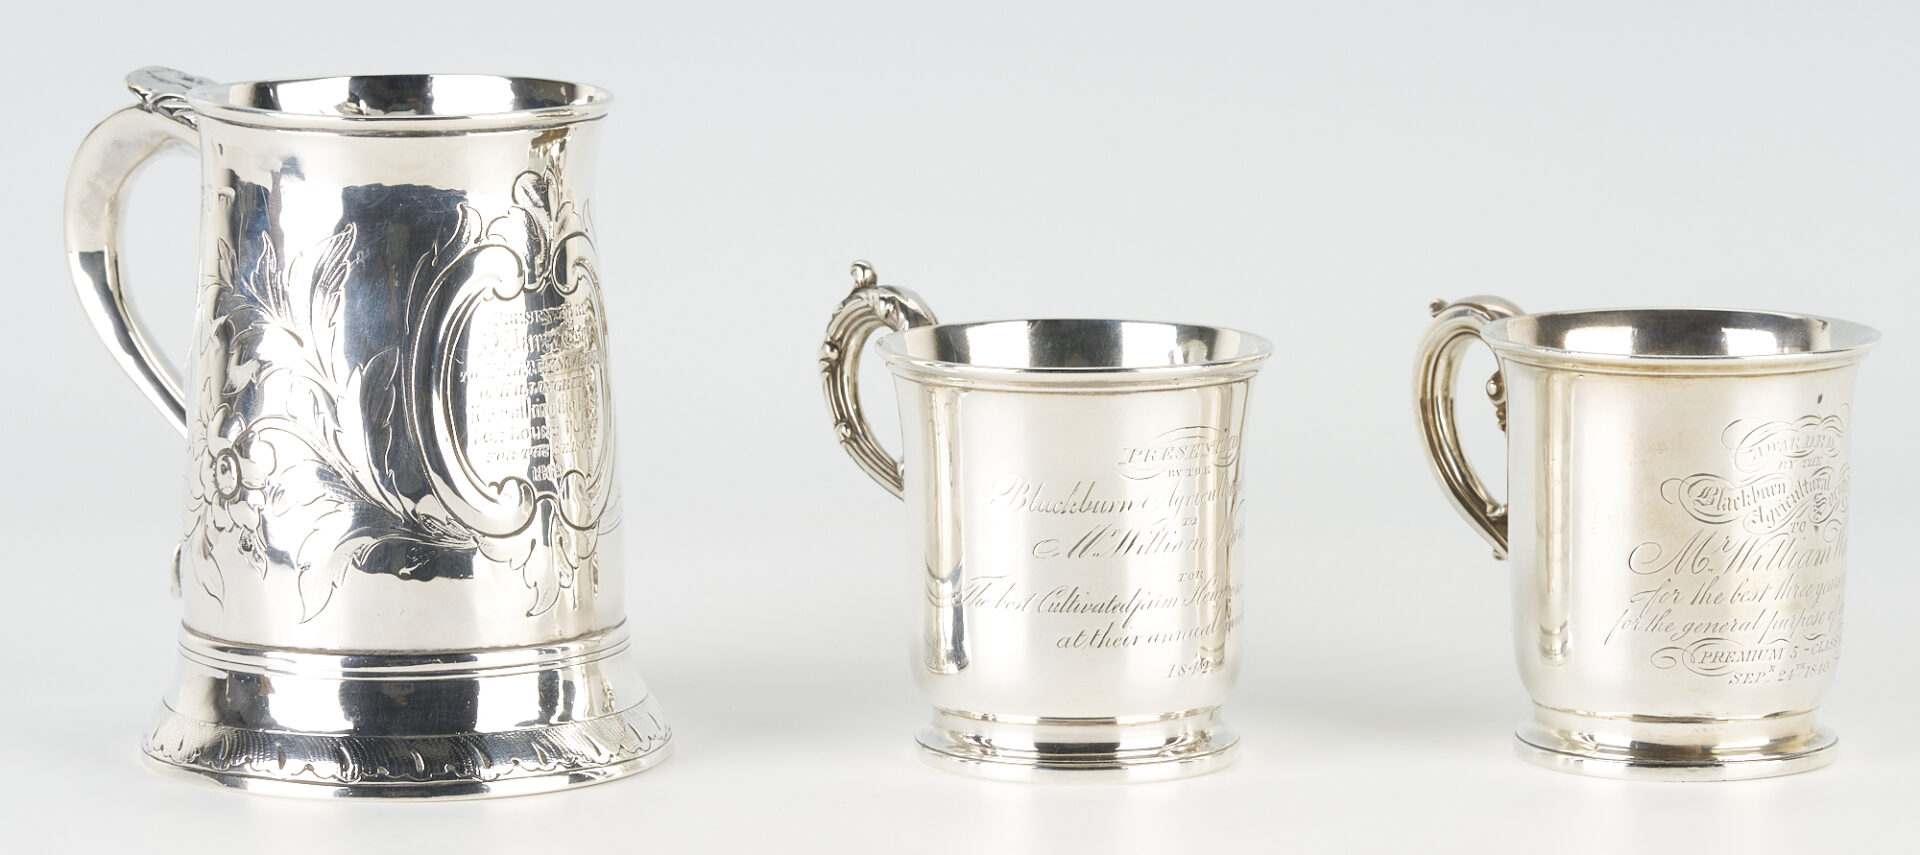 Lot 43: 3 Silver Cups including "Best Fox Hound Puppy" Trophy Cup